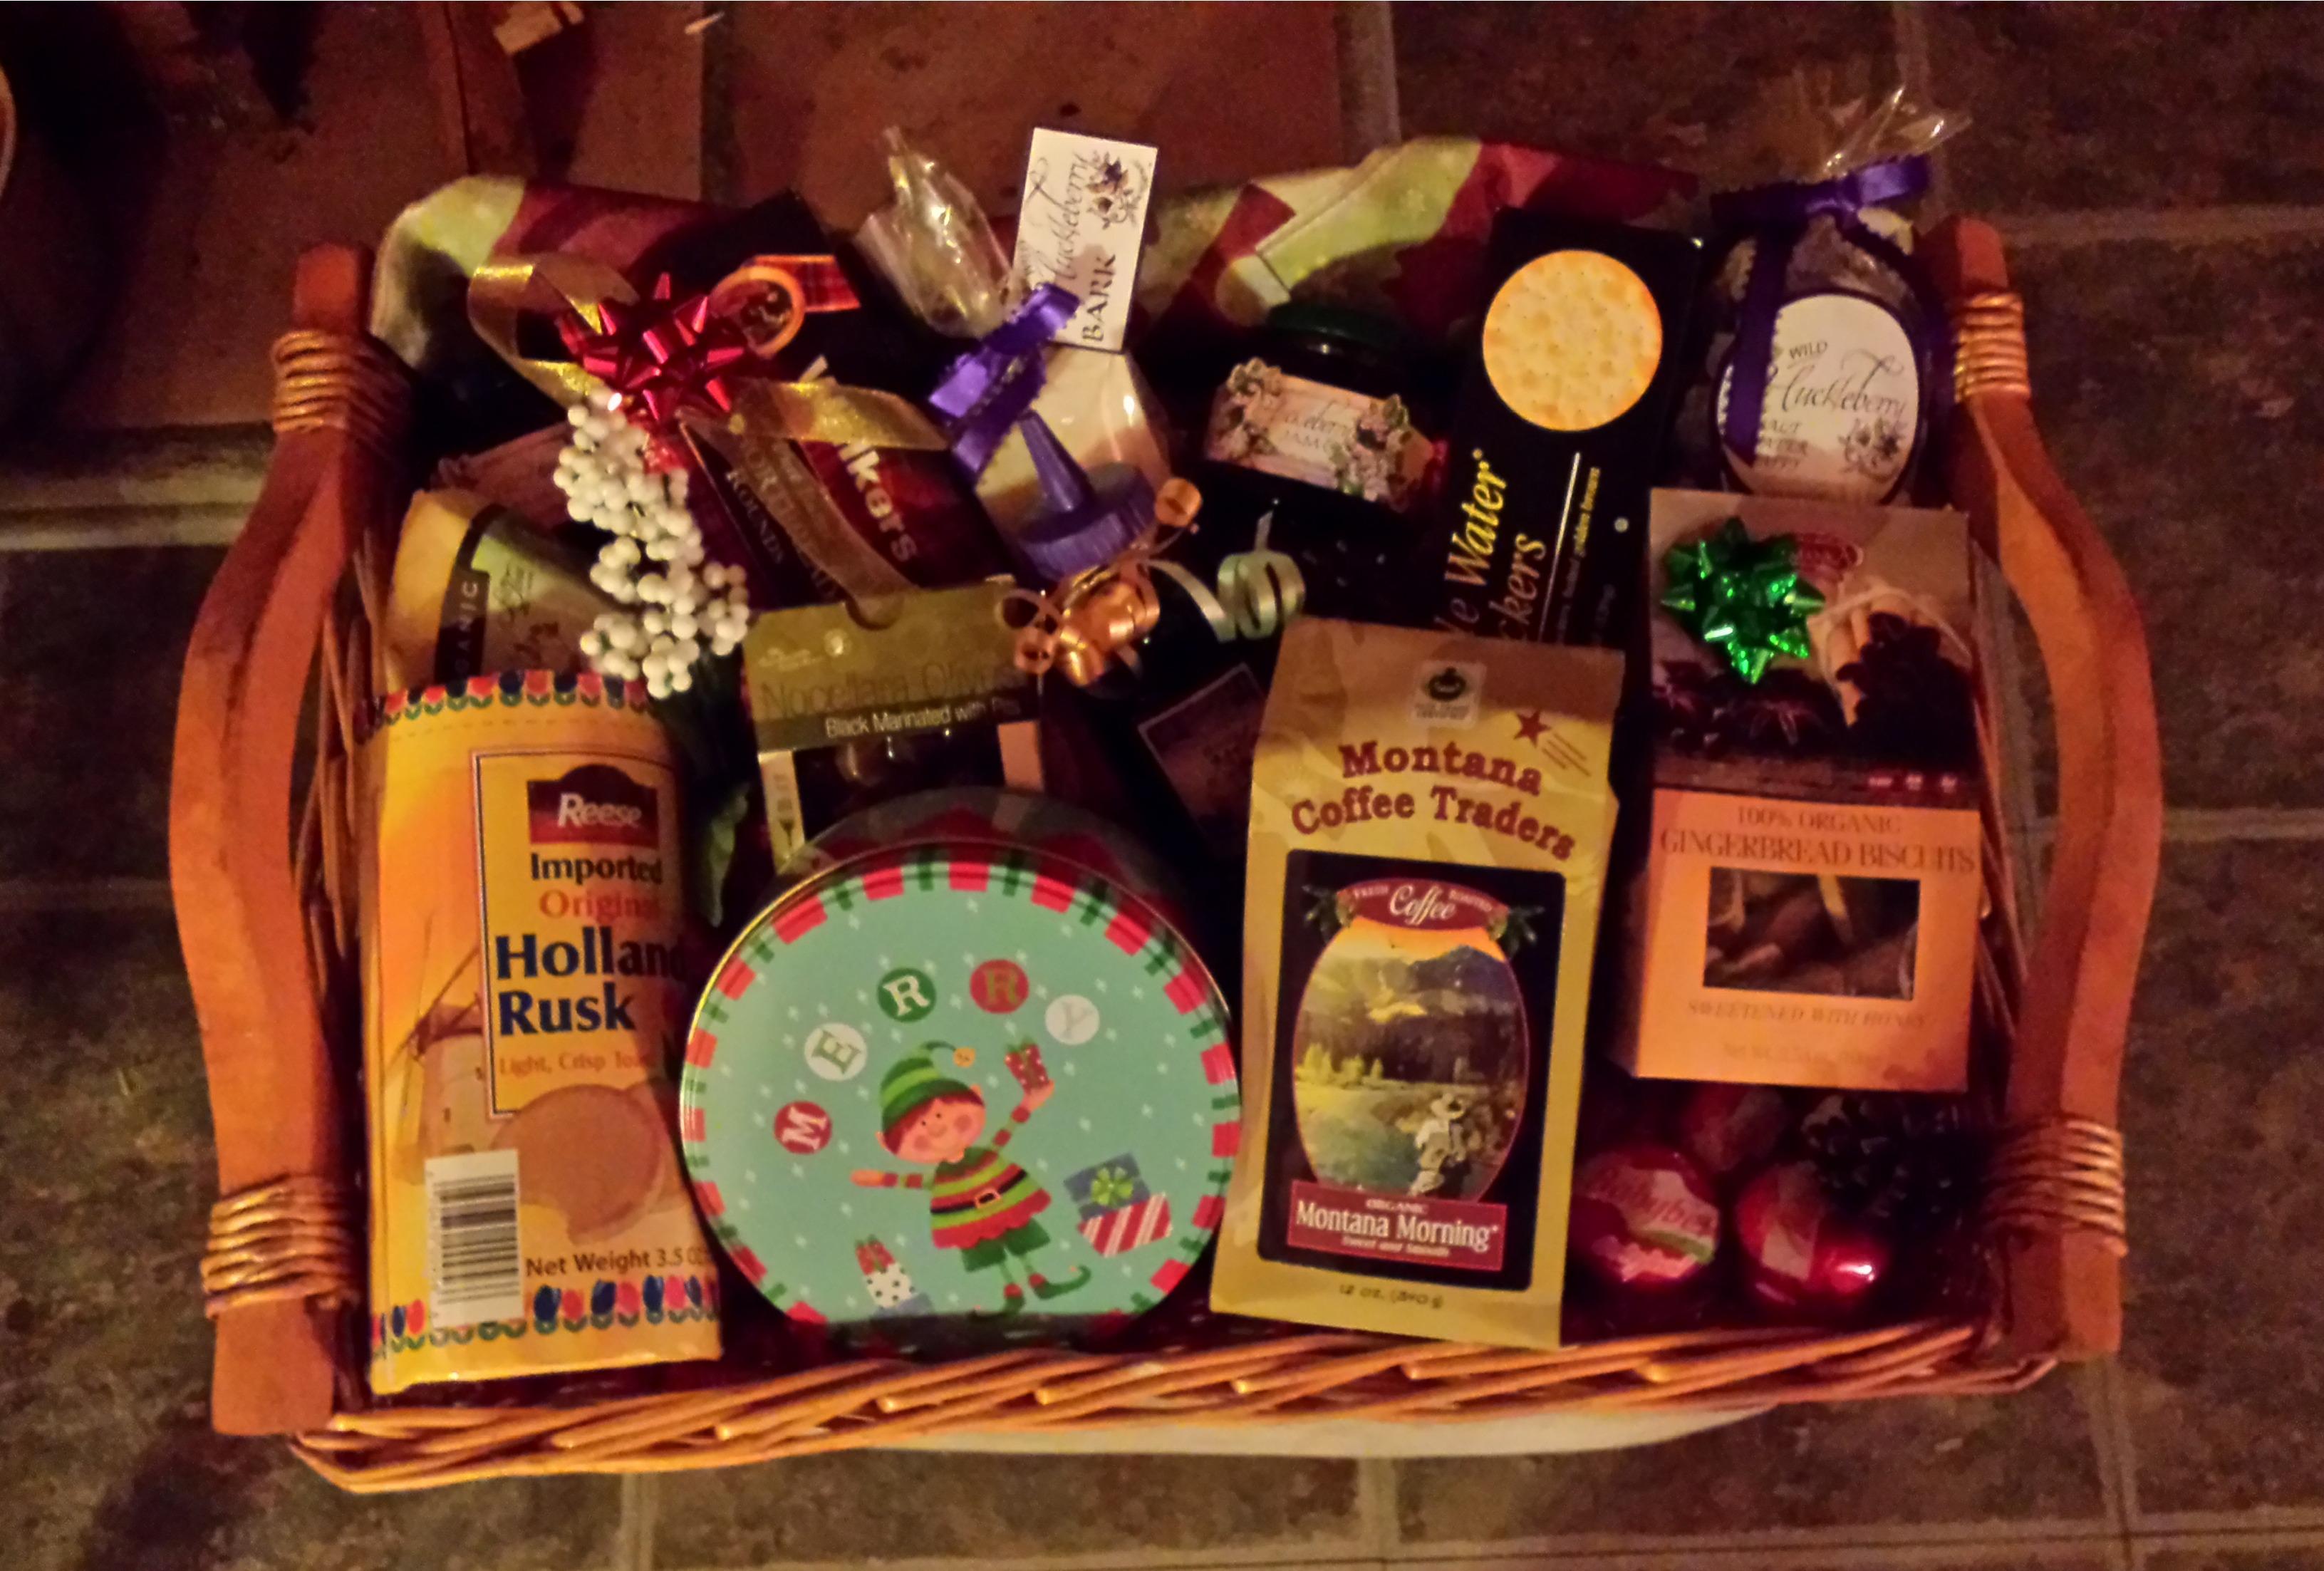 Basket Full Of Yummy Treats Includes Fair Trade Locally Roasted Coffee And Huckleberry Products Such As Jams Syrup Cans